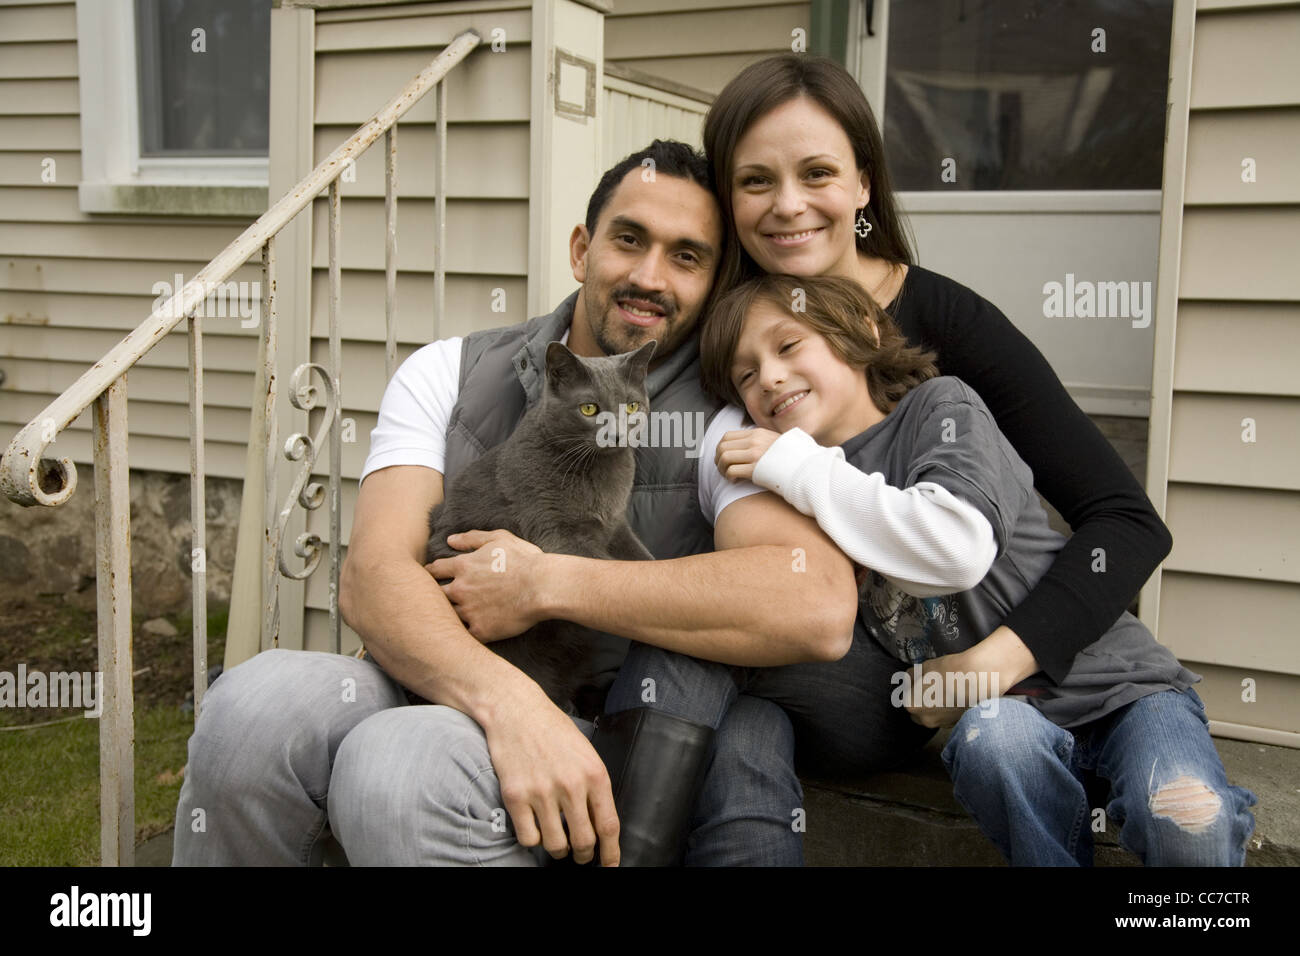 Portrait of an American family with dad from Guatemala and mom from Poland. Stock Photo